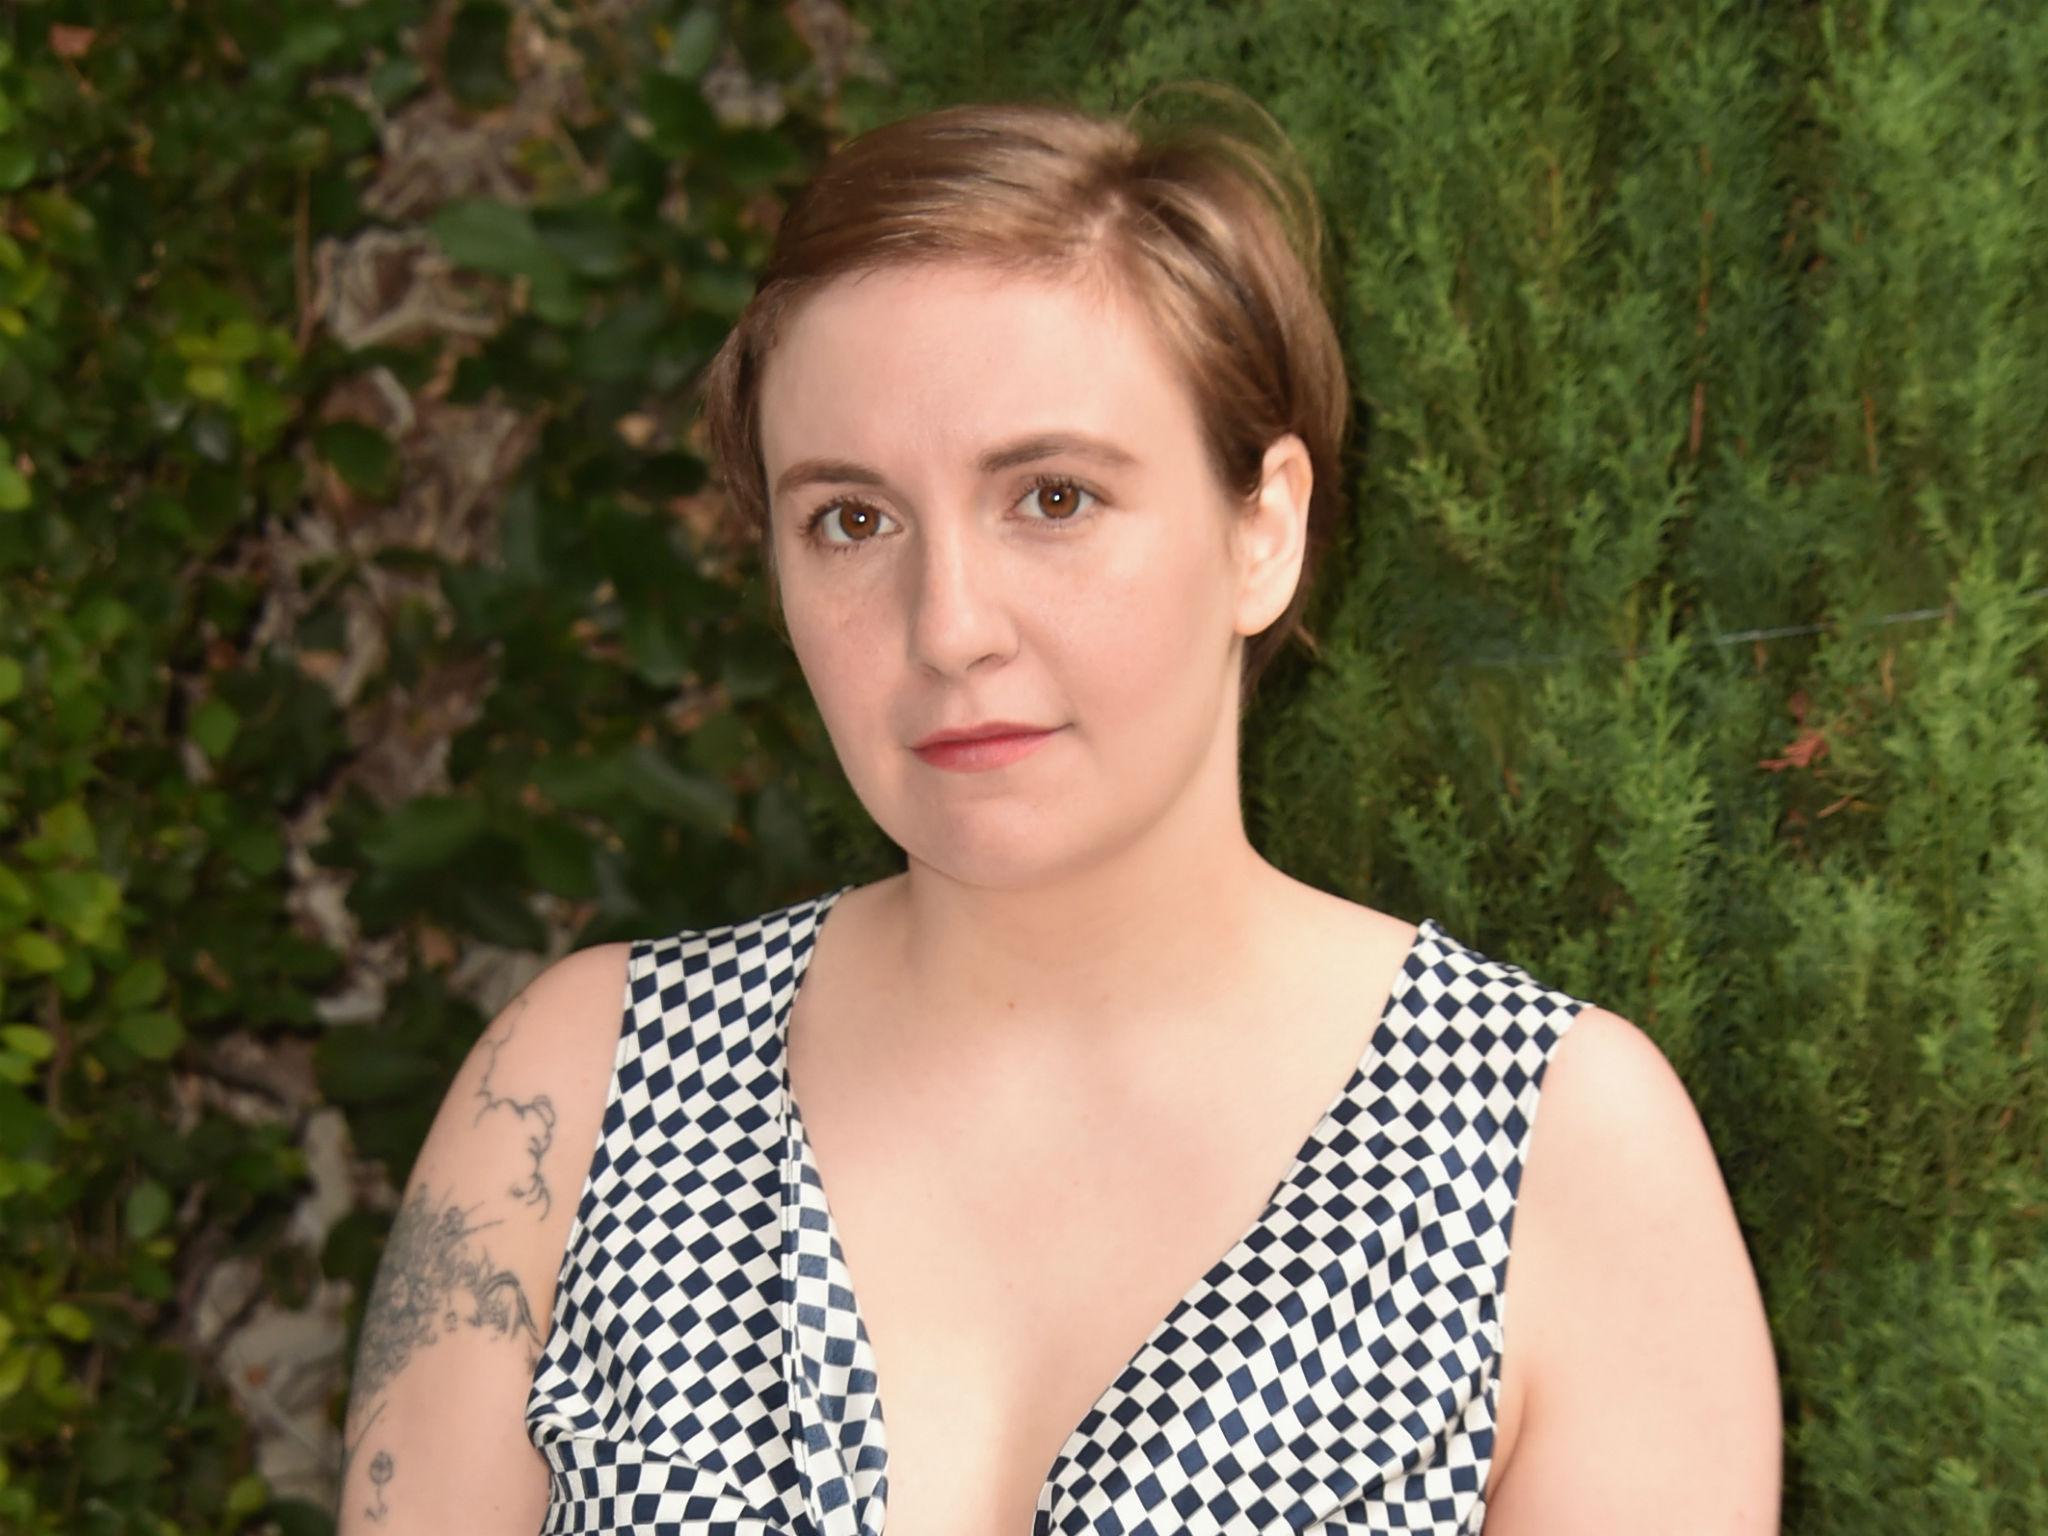 Stanford rape case Lena Dunham and the cast of Girls dedicate video message to survivor The Independent The Independent photo pic